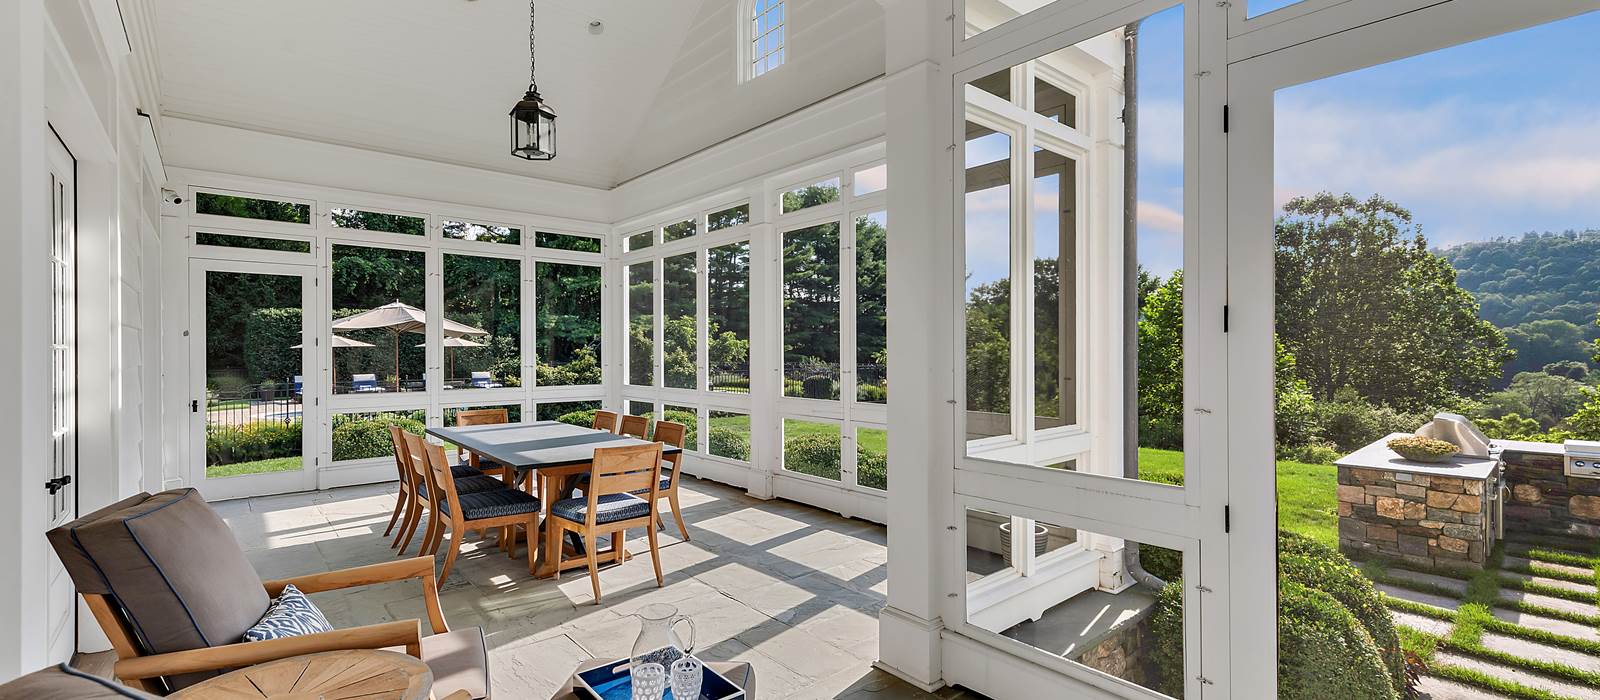 Grand Colonial Revival - Sunroom Revisited